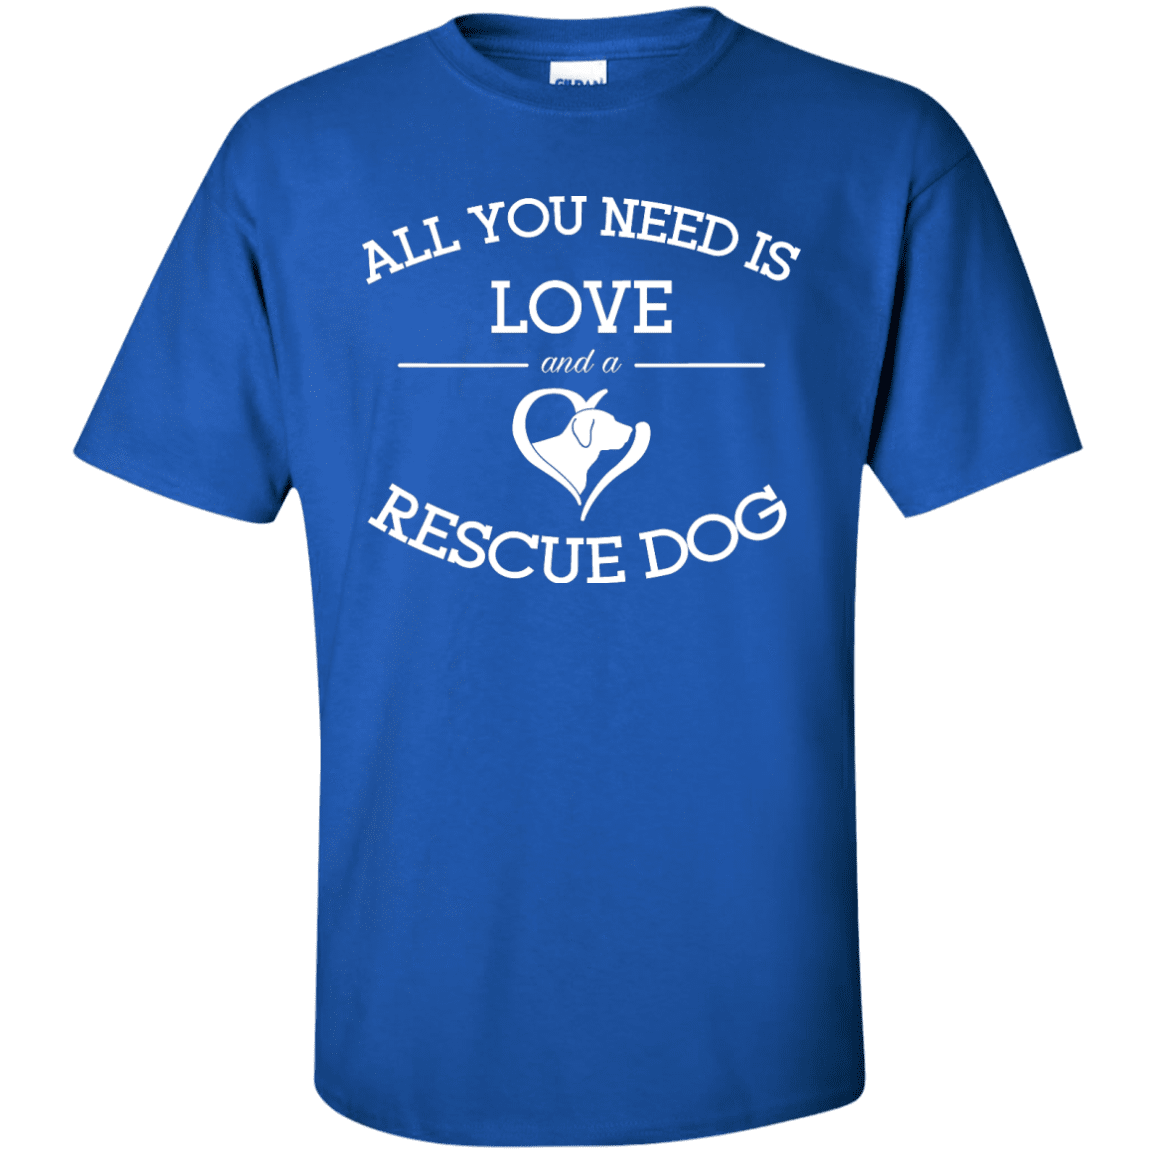 Love and a Rescue Dog - T Shirt.